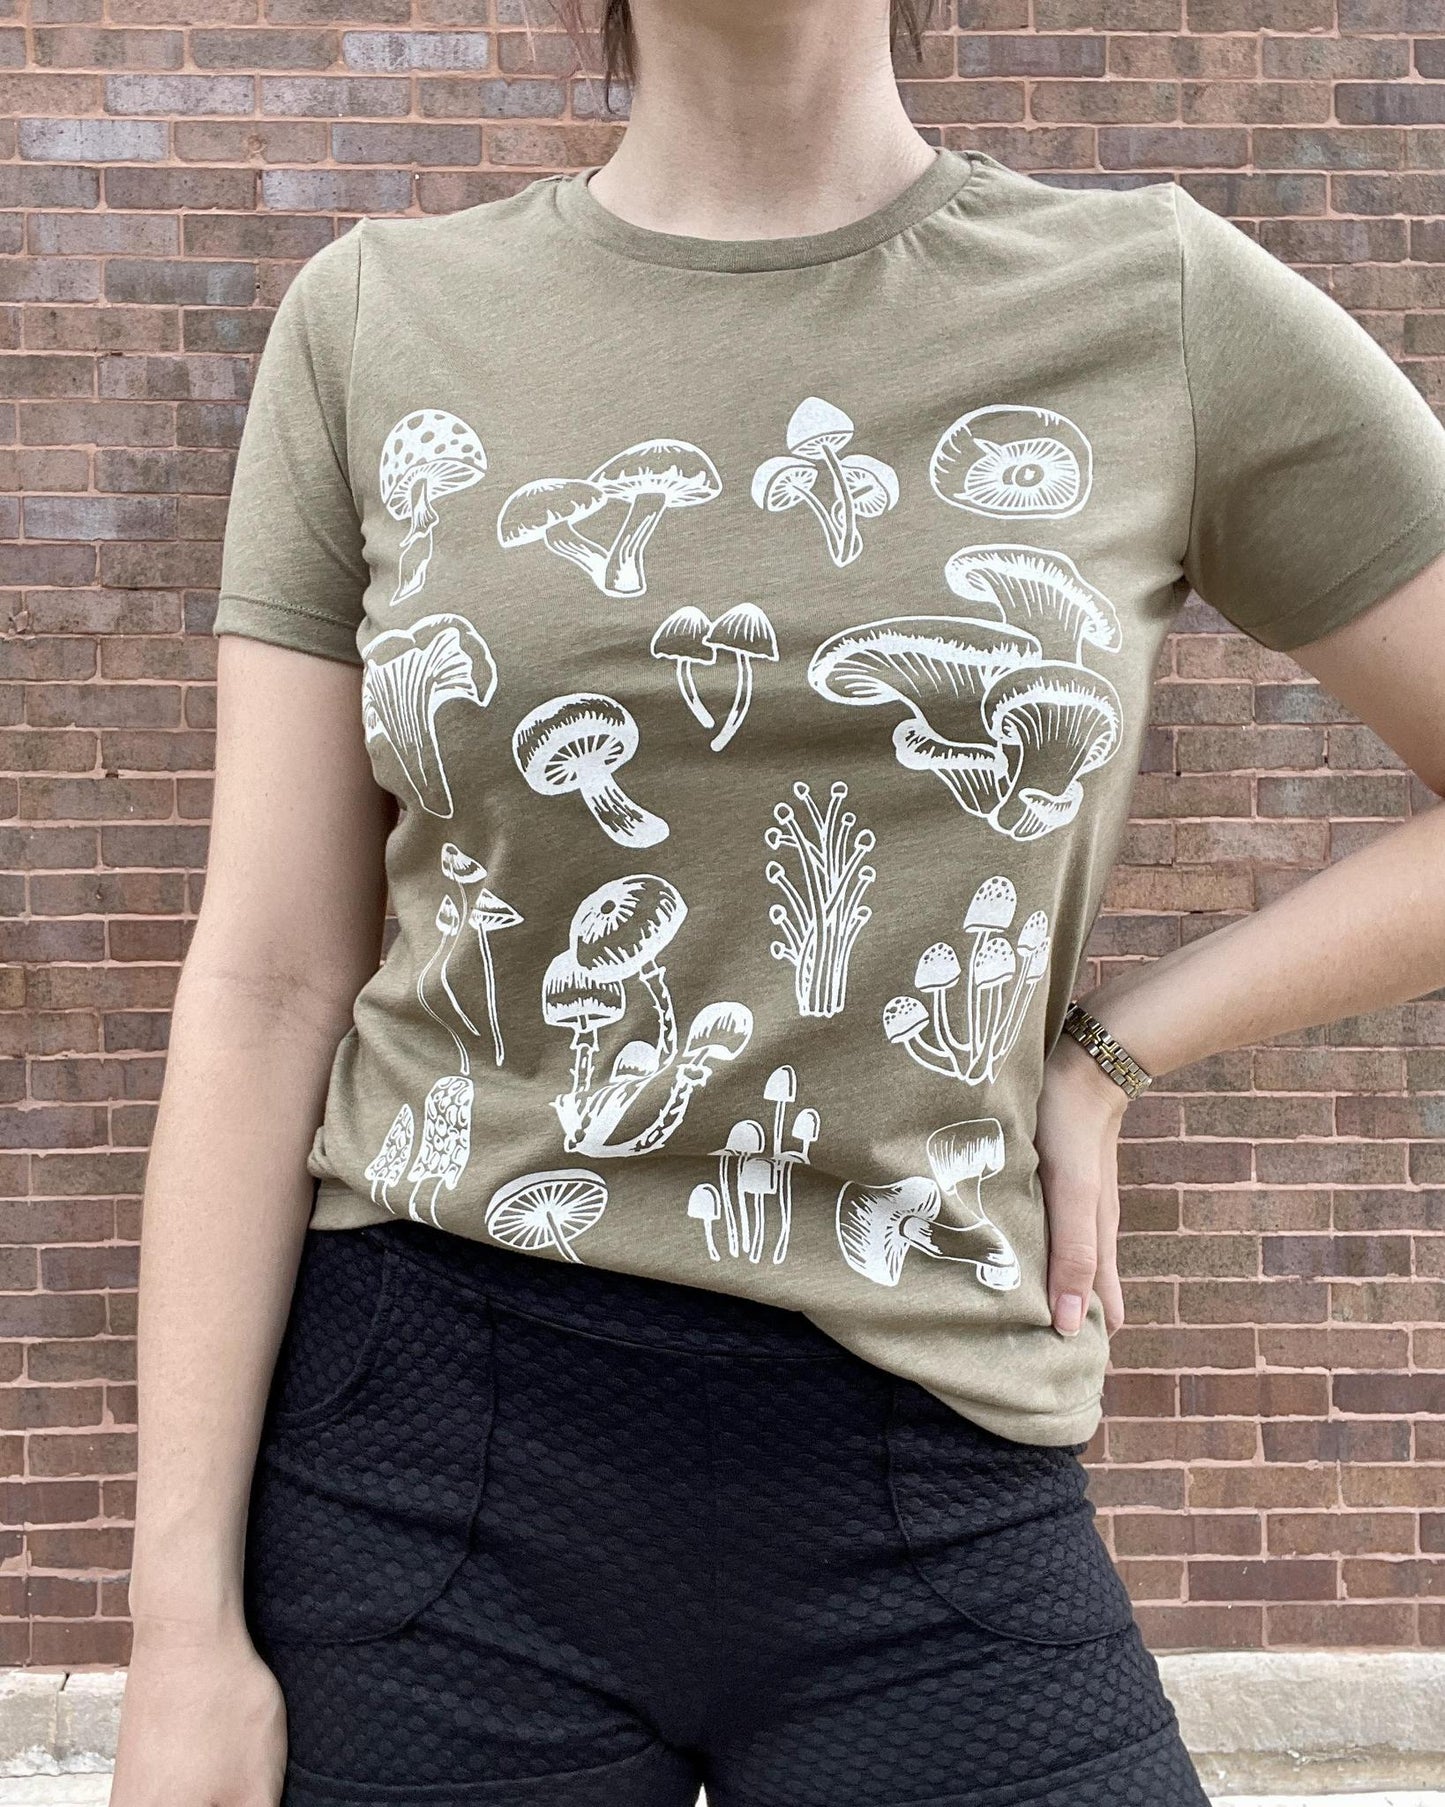 Mad Love Heather Olive Relaxed Crew Tee Mushrooms